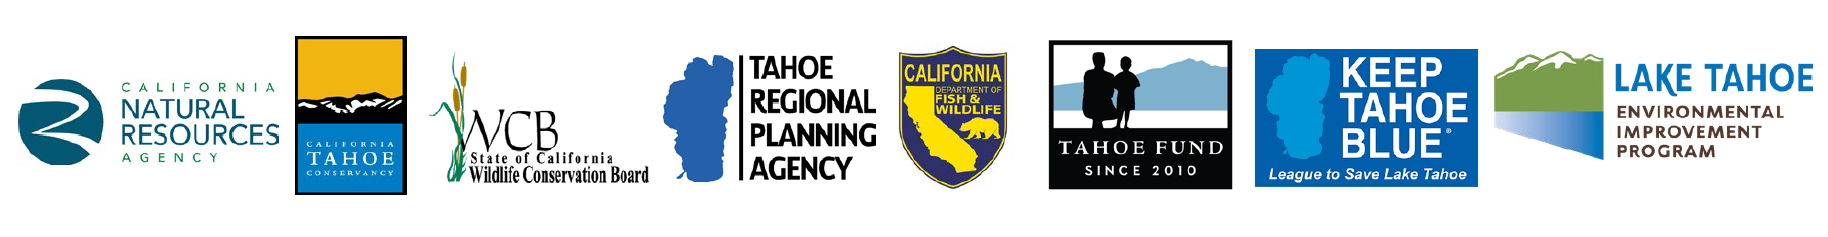 Logos of the California Natural Resources Agency, California Tahoe Conservancy, Wildlife Conservation Board, Tahoe Regional Planning Agency, California Department of Fish and Wildlife, Tahoe Fund, League to Save Lake Tahoe (Keep Tahoe Blue), and Lake Tahoe Environmental Improvement Program